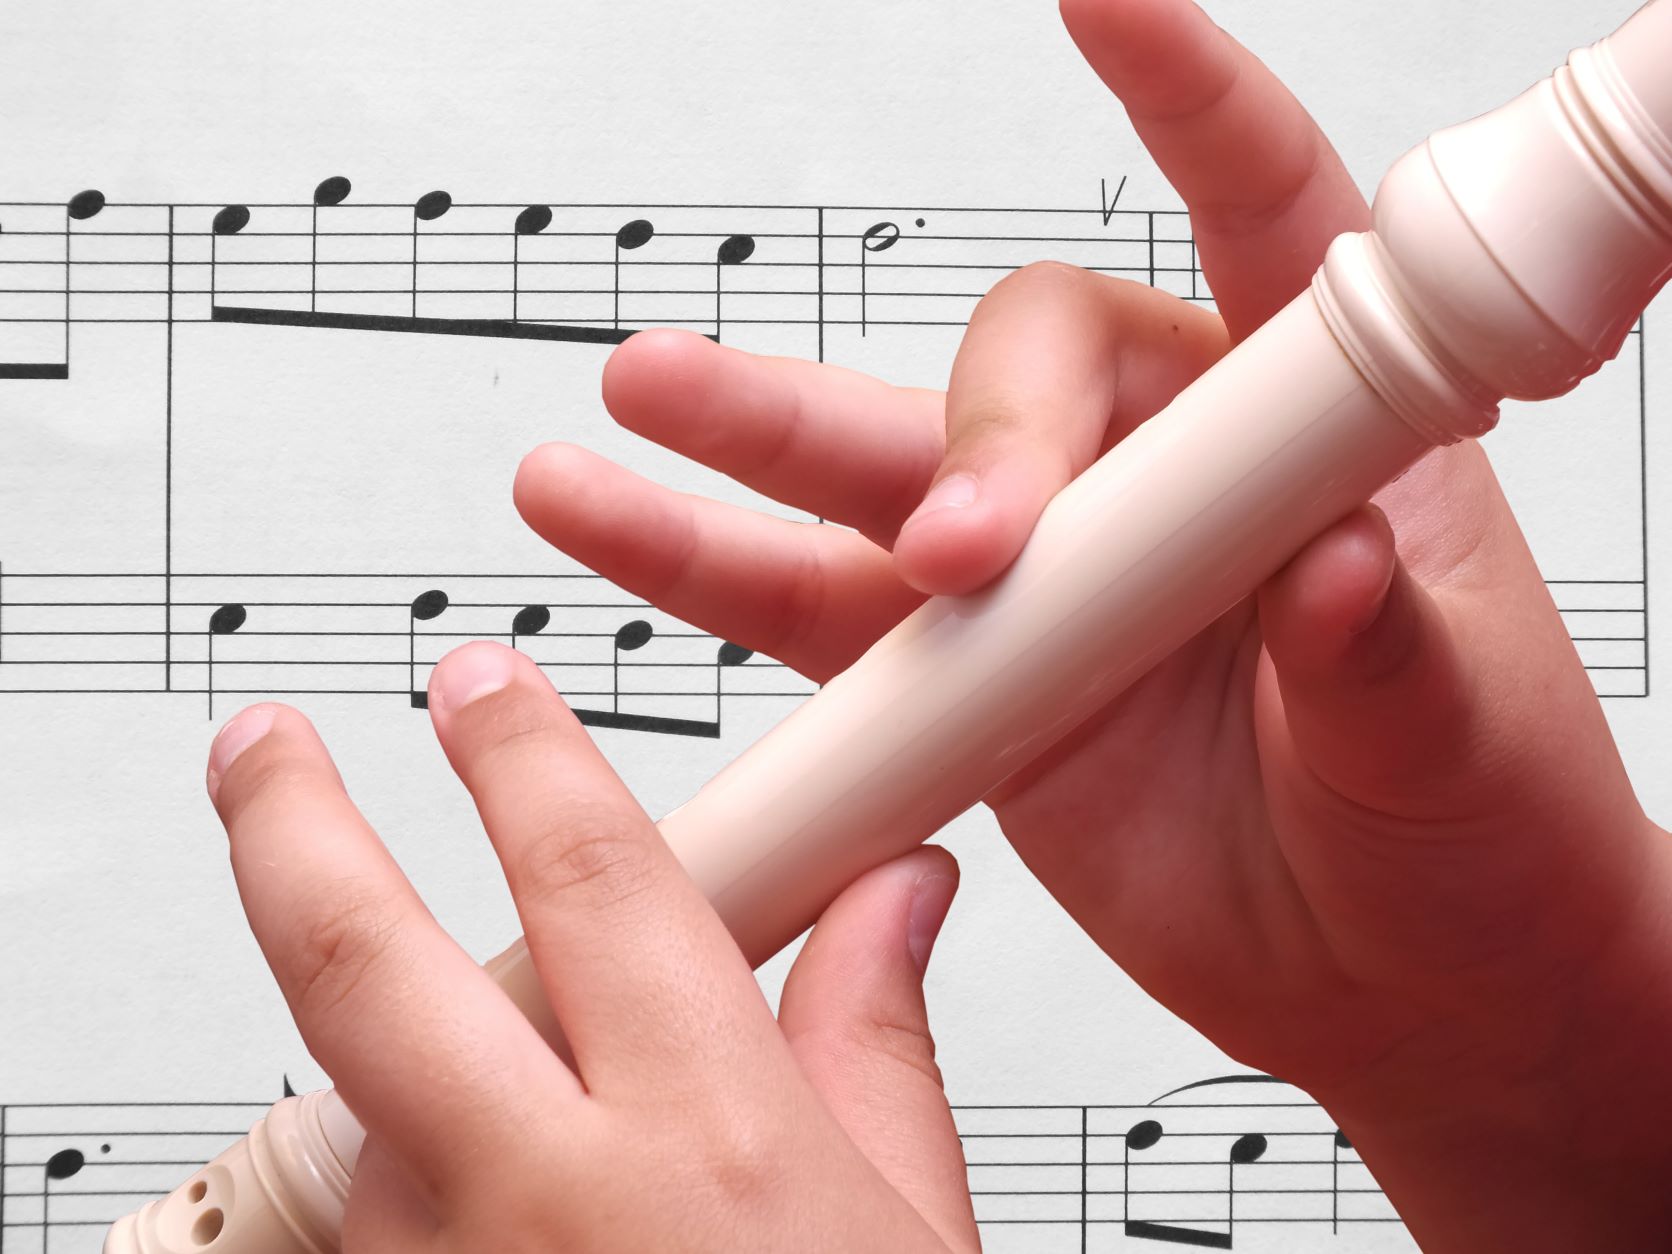 early music education; benefits of music recorder instrument